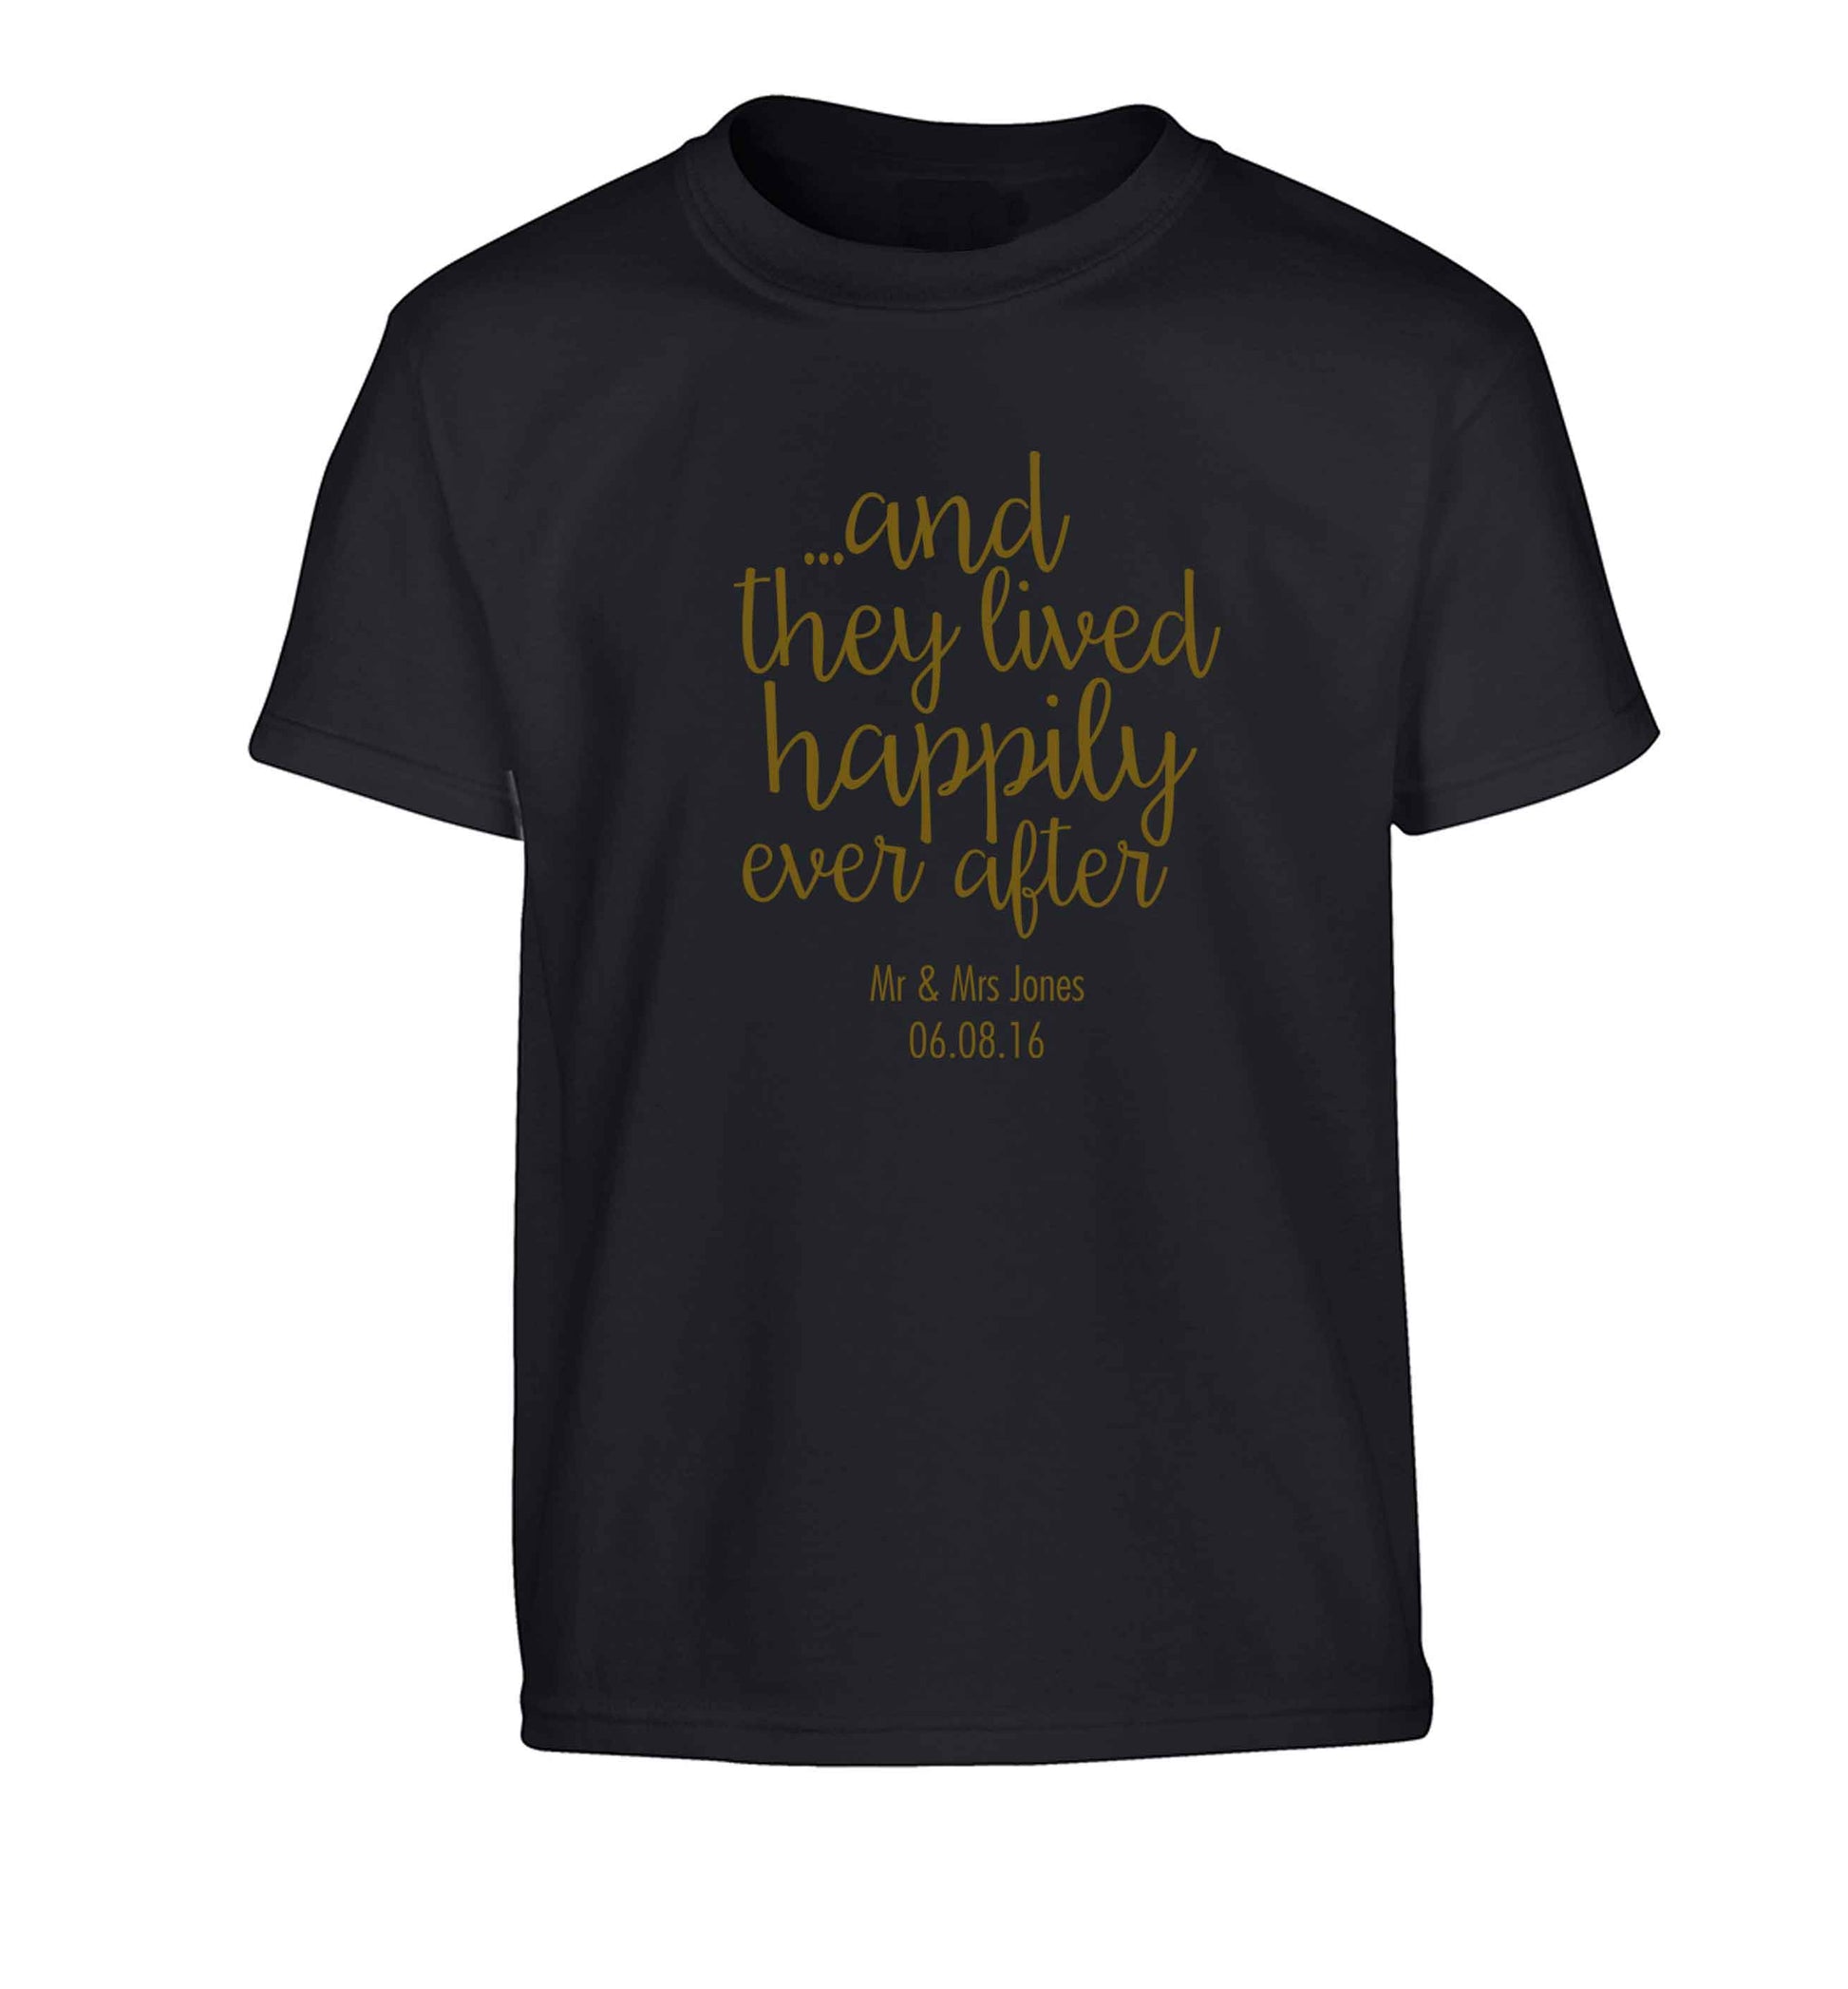 ...and they lived happily ever after - personalised date and names Children's black Tshirt 12-13 Years